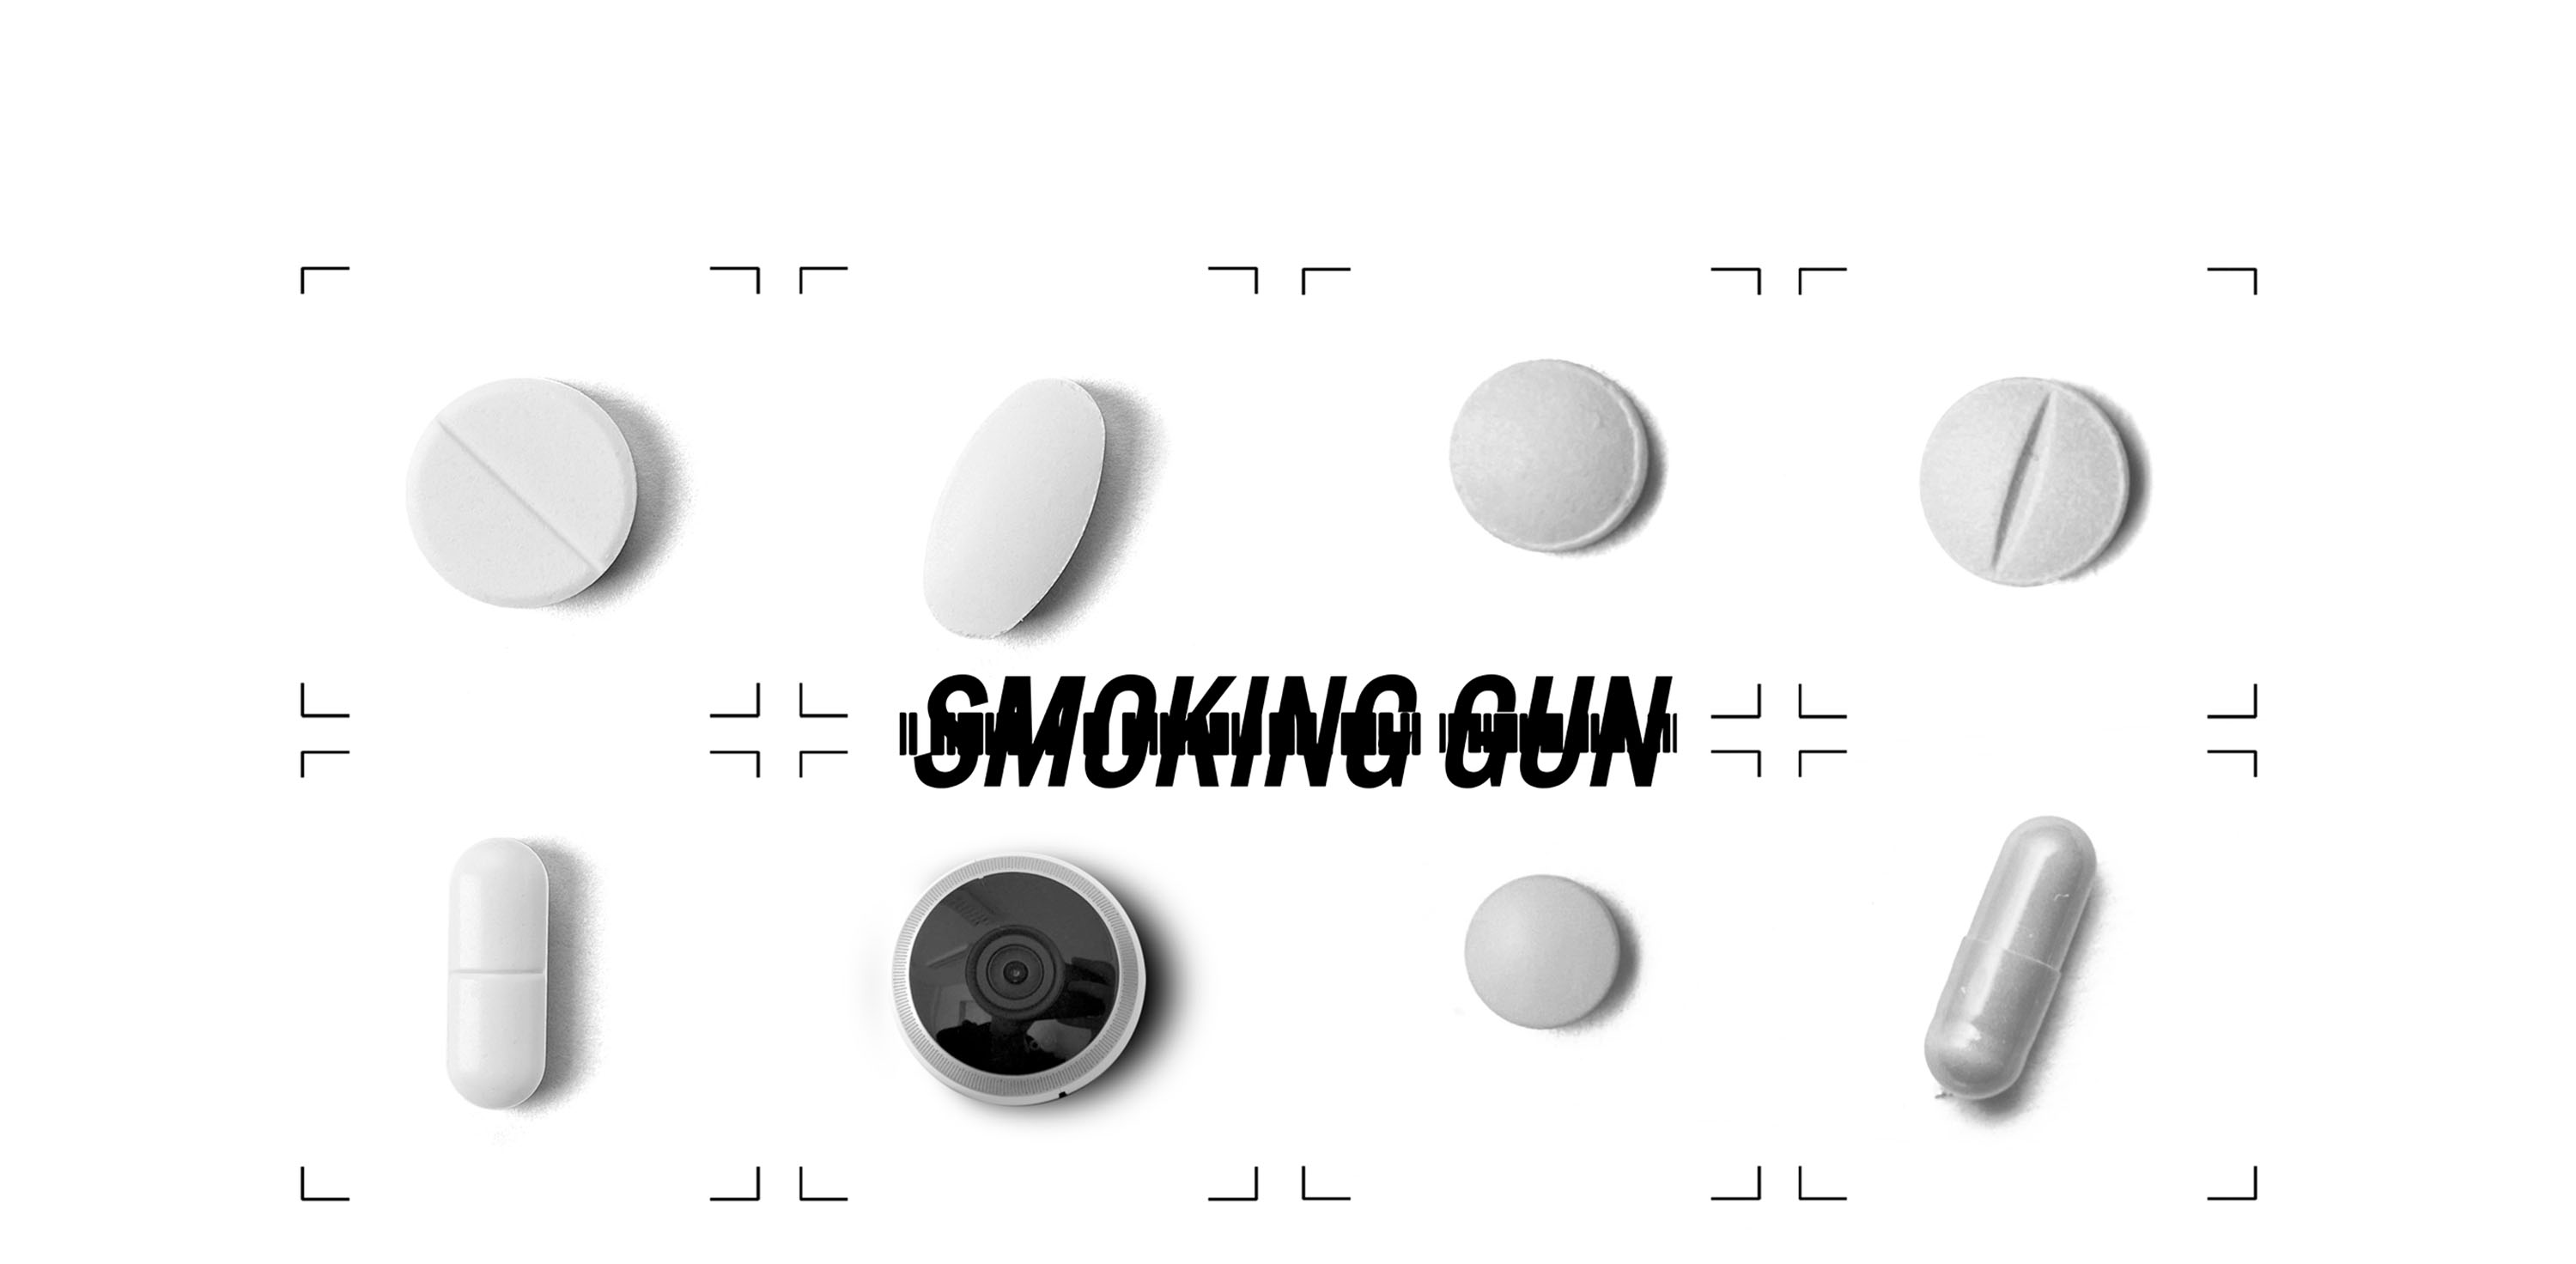 Promotional material for Smoking Gun. Seven white pills lay in a grid, among them a security camera. Overlaid are the words 'Smoking Gun' with a glitchy font